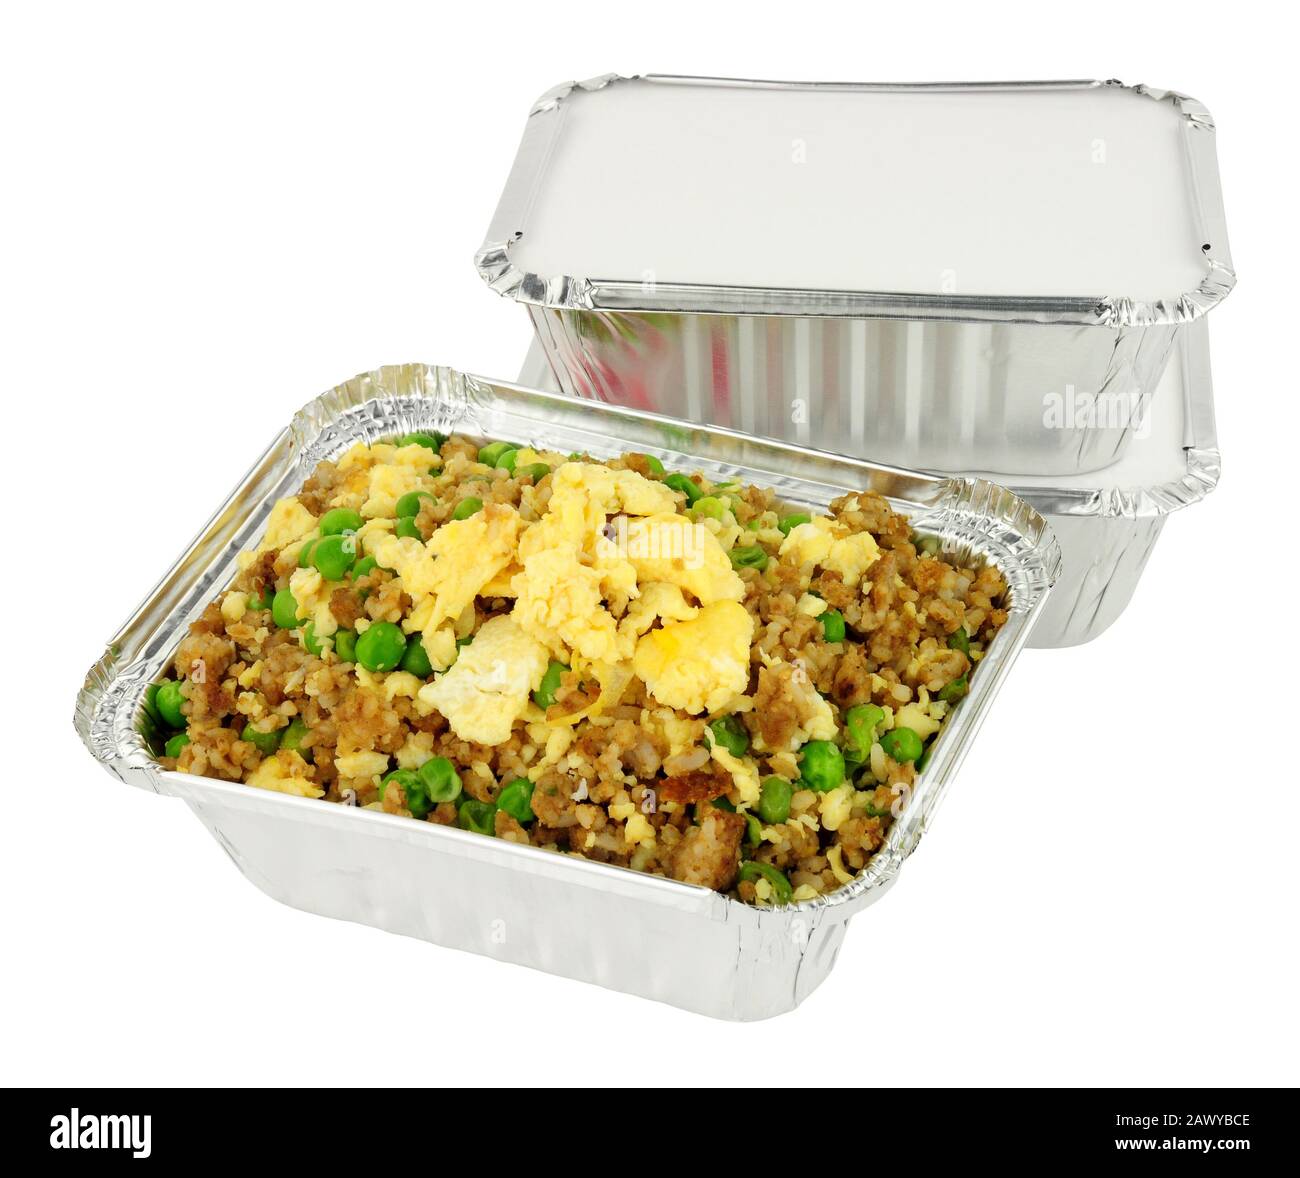 https://c8.alamy.com/comp/2AWYBCE/chinese-egg-fried-rice-in-a-foil-take-away-container-isolated-on-a-white-background-2AWYBCE.jpg